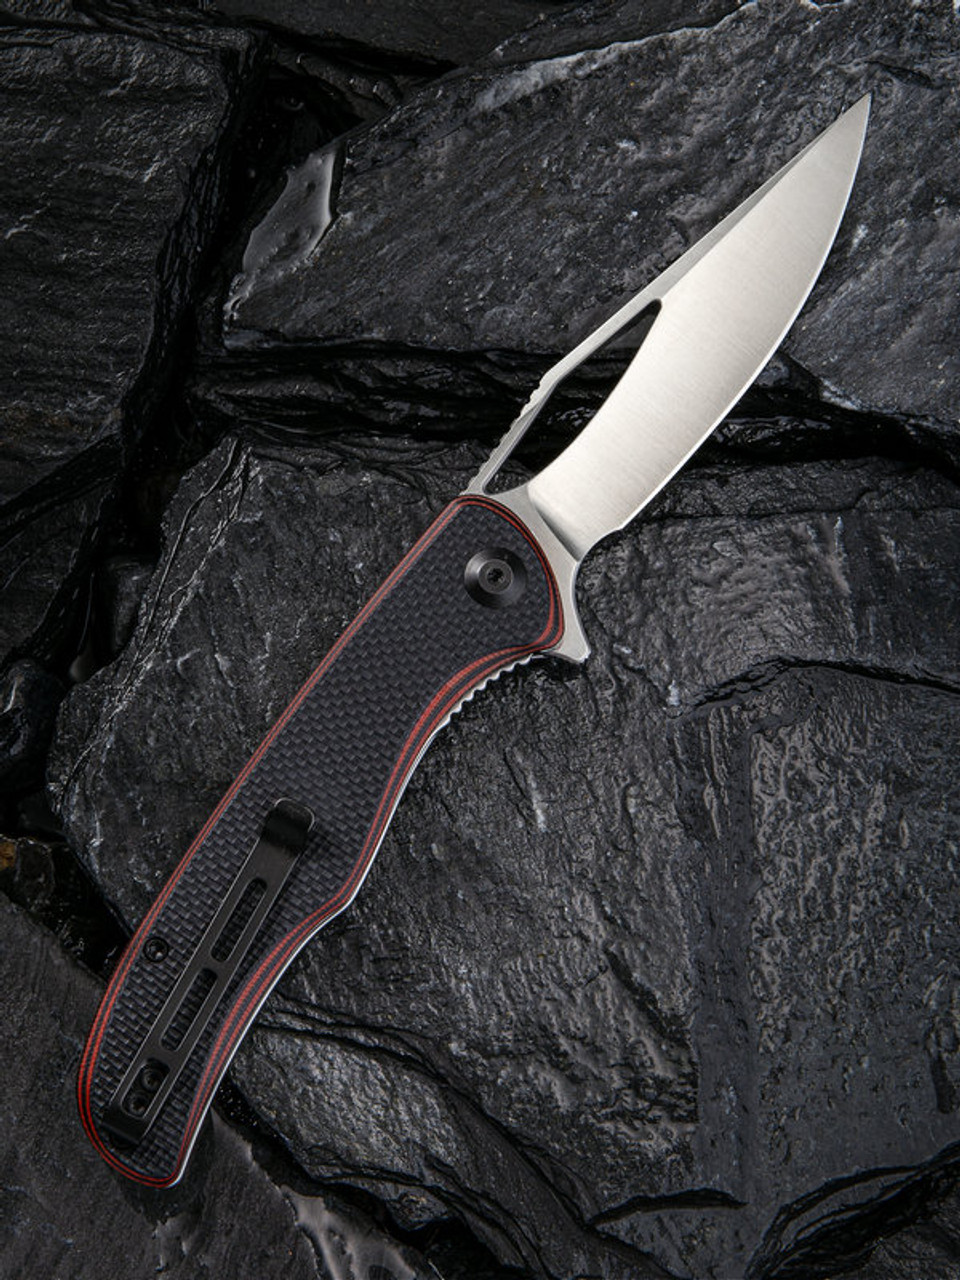 CIVIVI Shredder C912B, 3.7” D2 Satin Clip Point Plain Blade,  Red and Black Layered G-10 Handles with a Coarse Texture